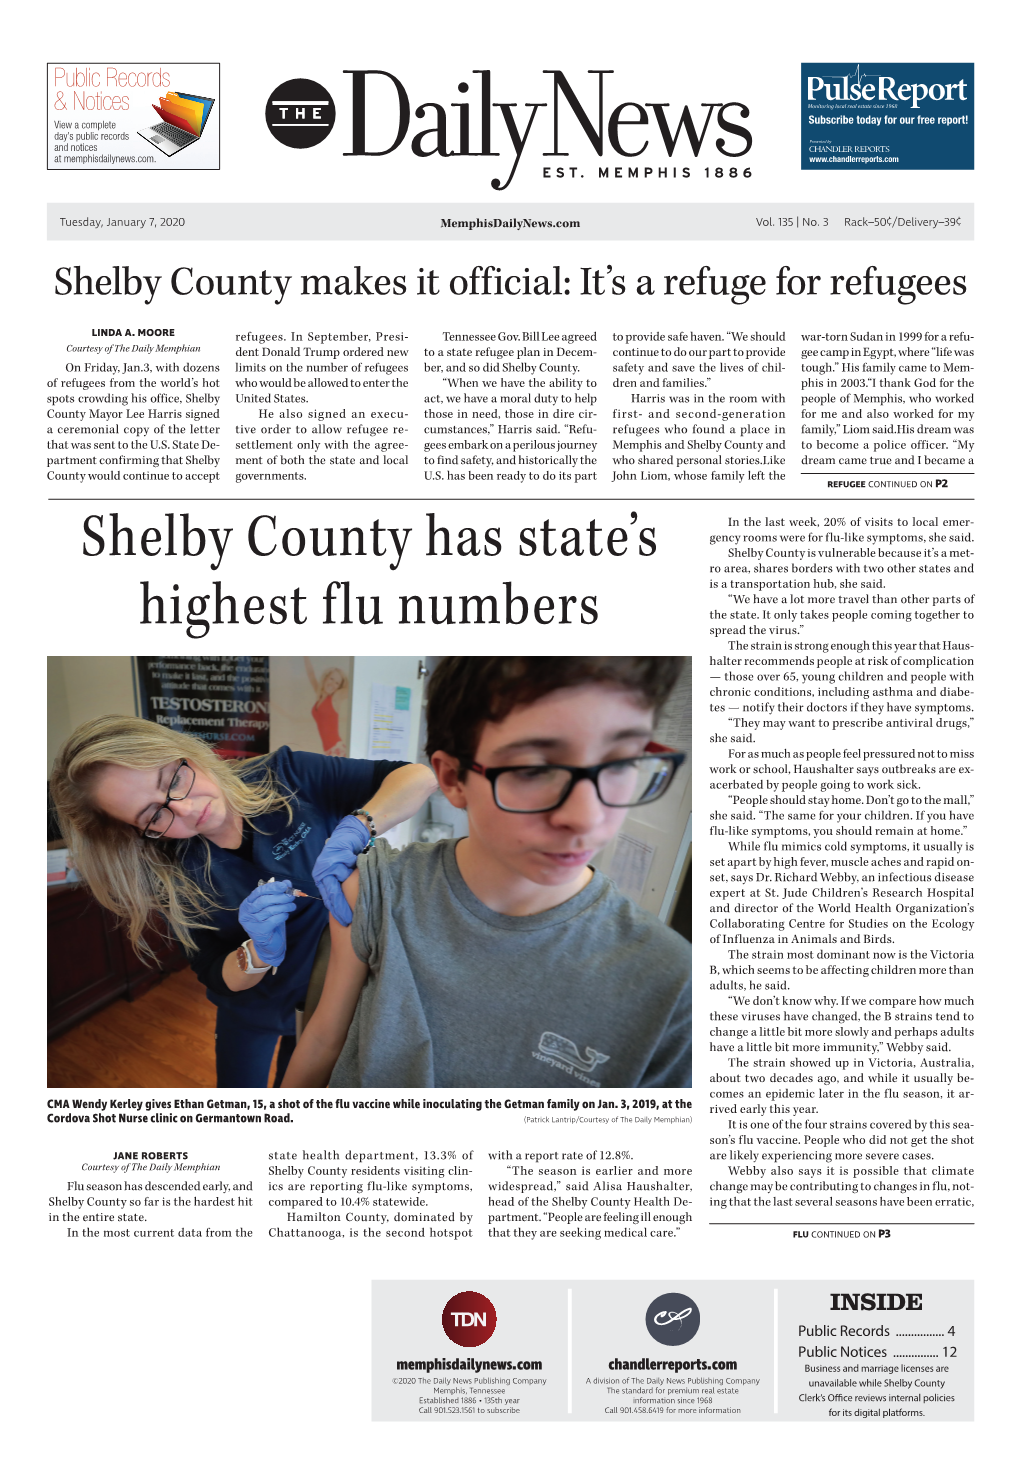 Shelby County Has State's Highest Flu Numbers